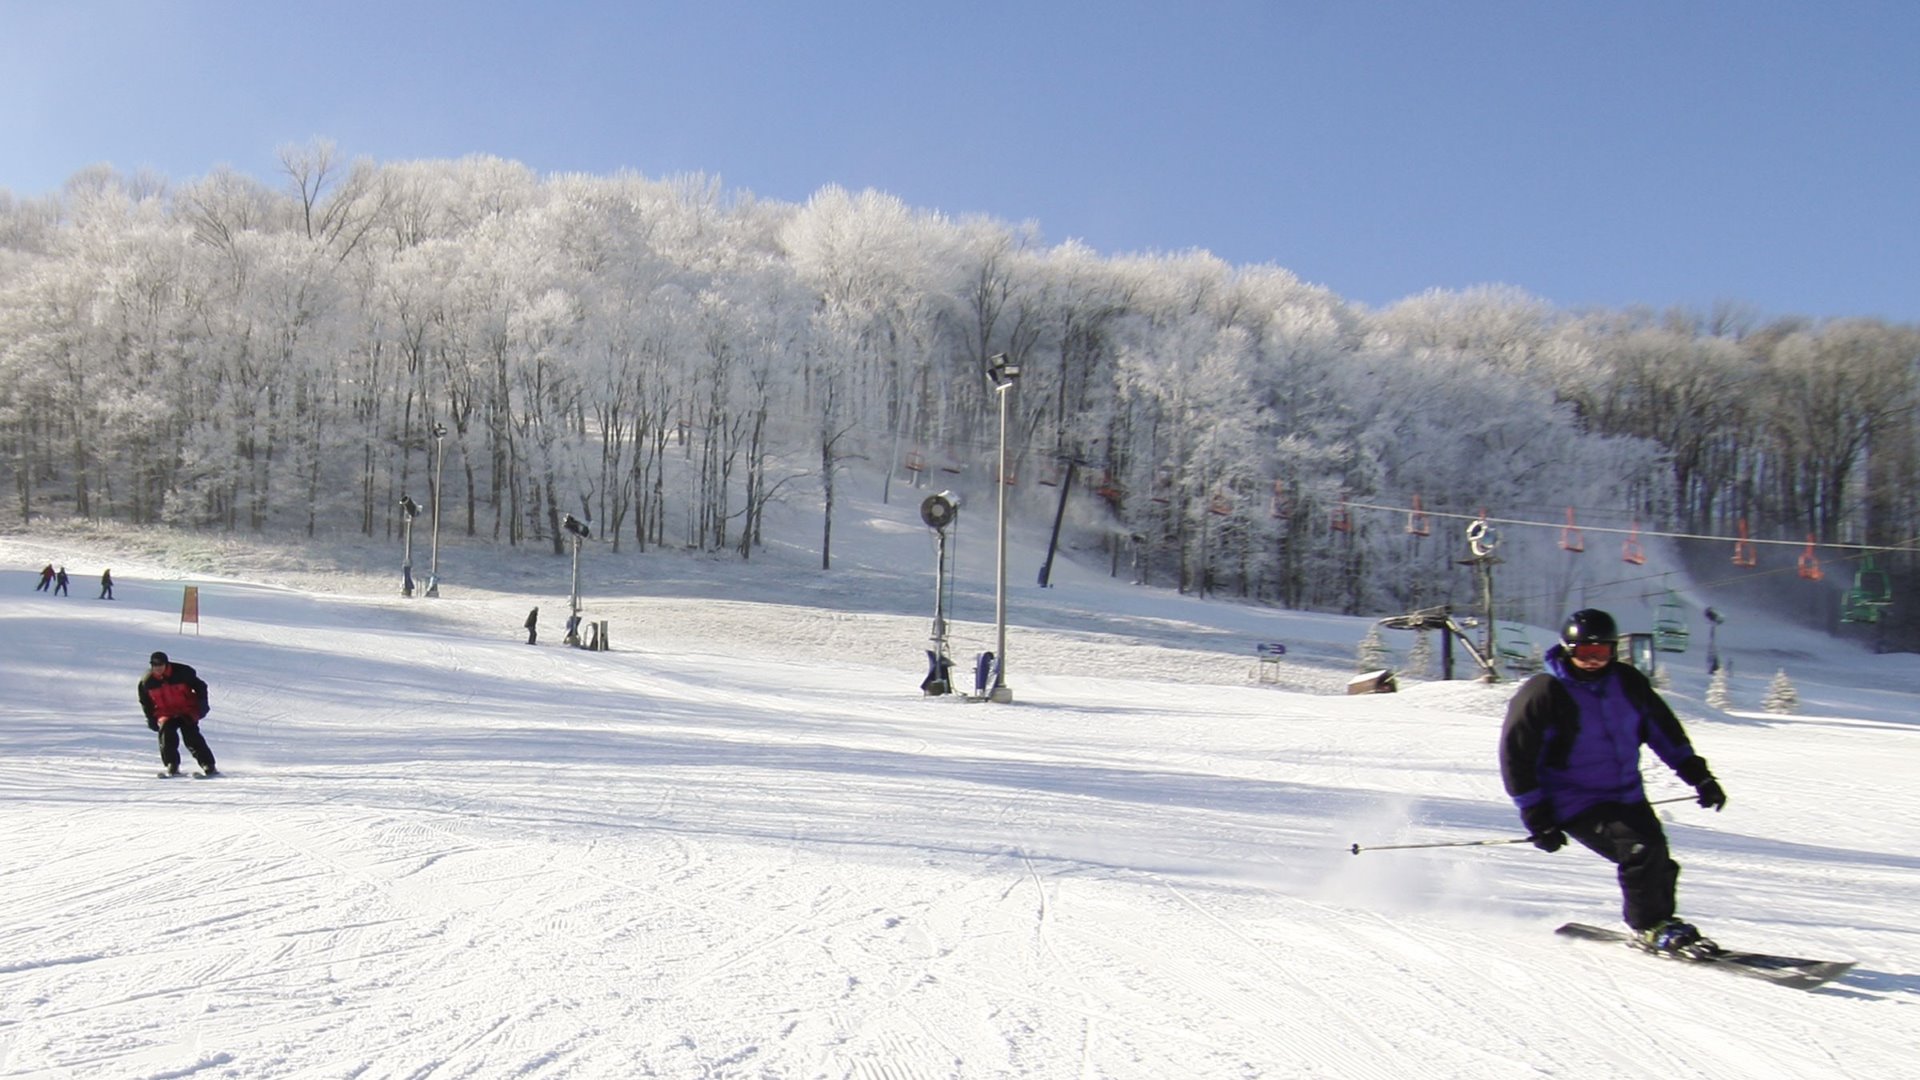 Hit the Slopes On This Winter Getaway in Southeast Indiana